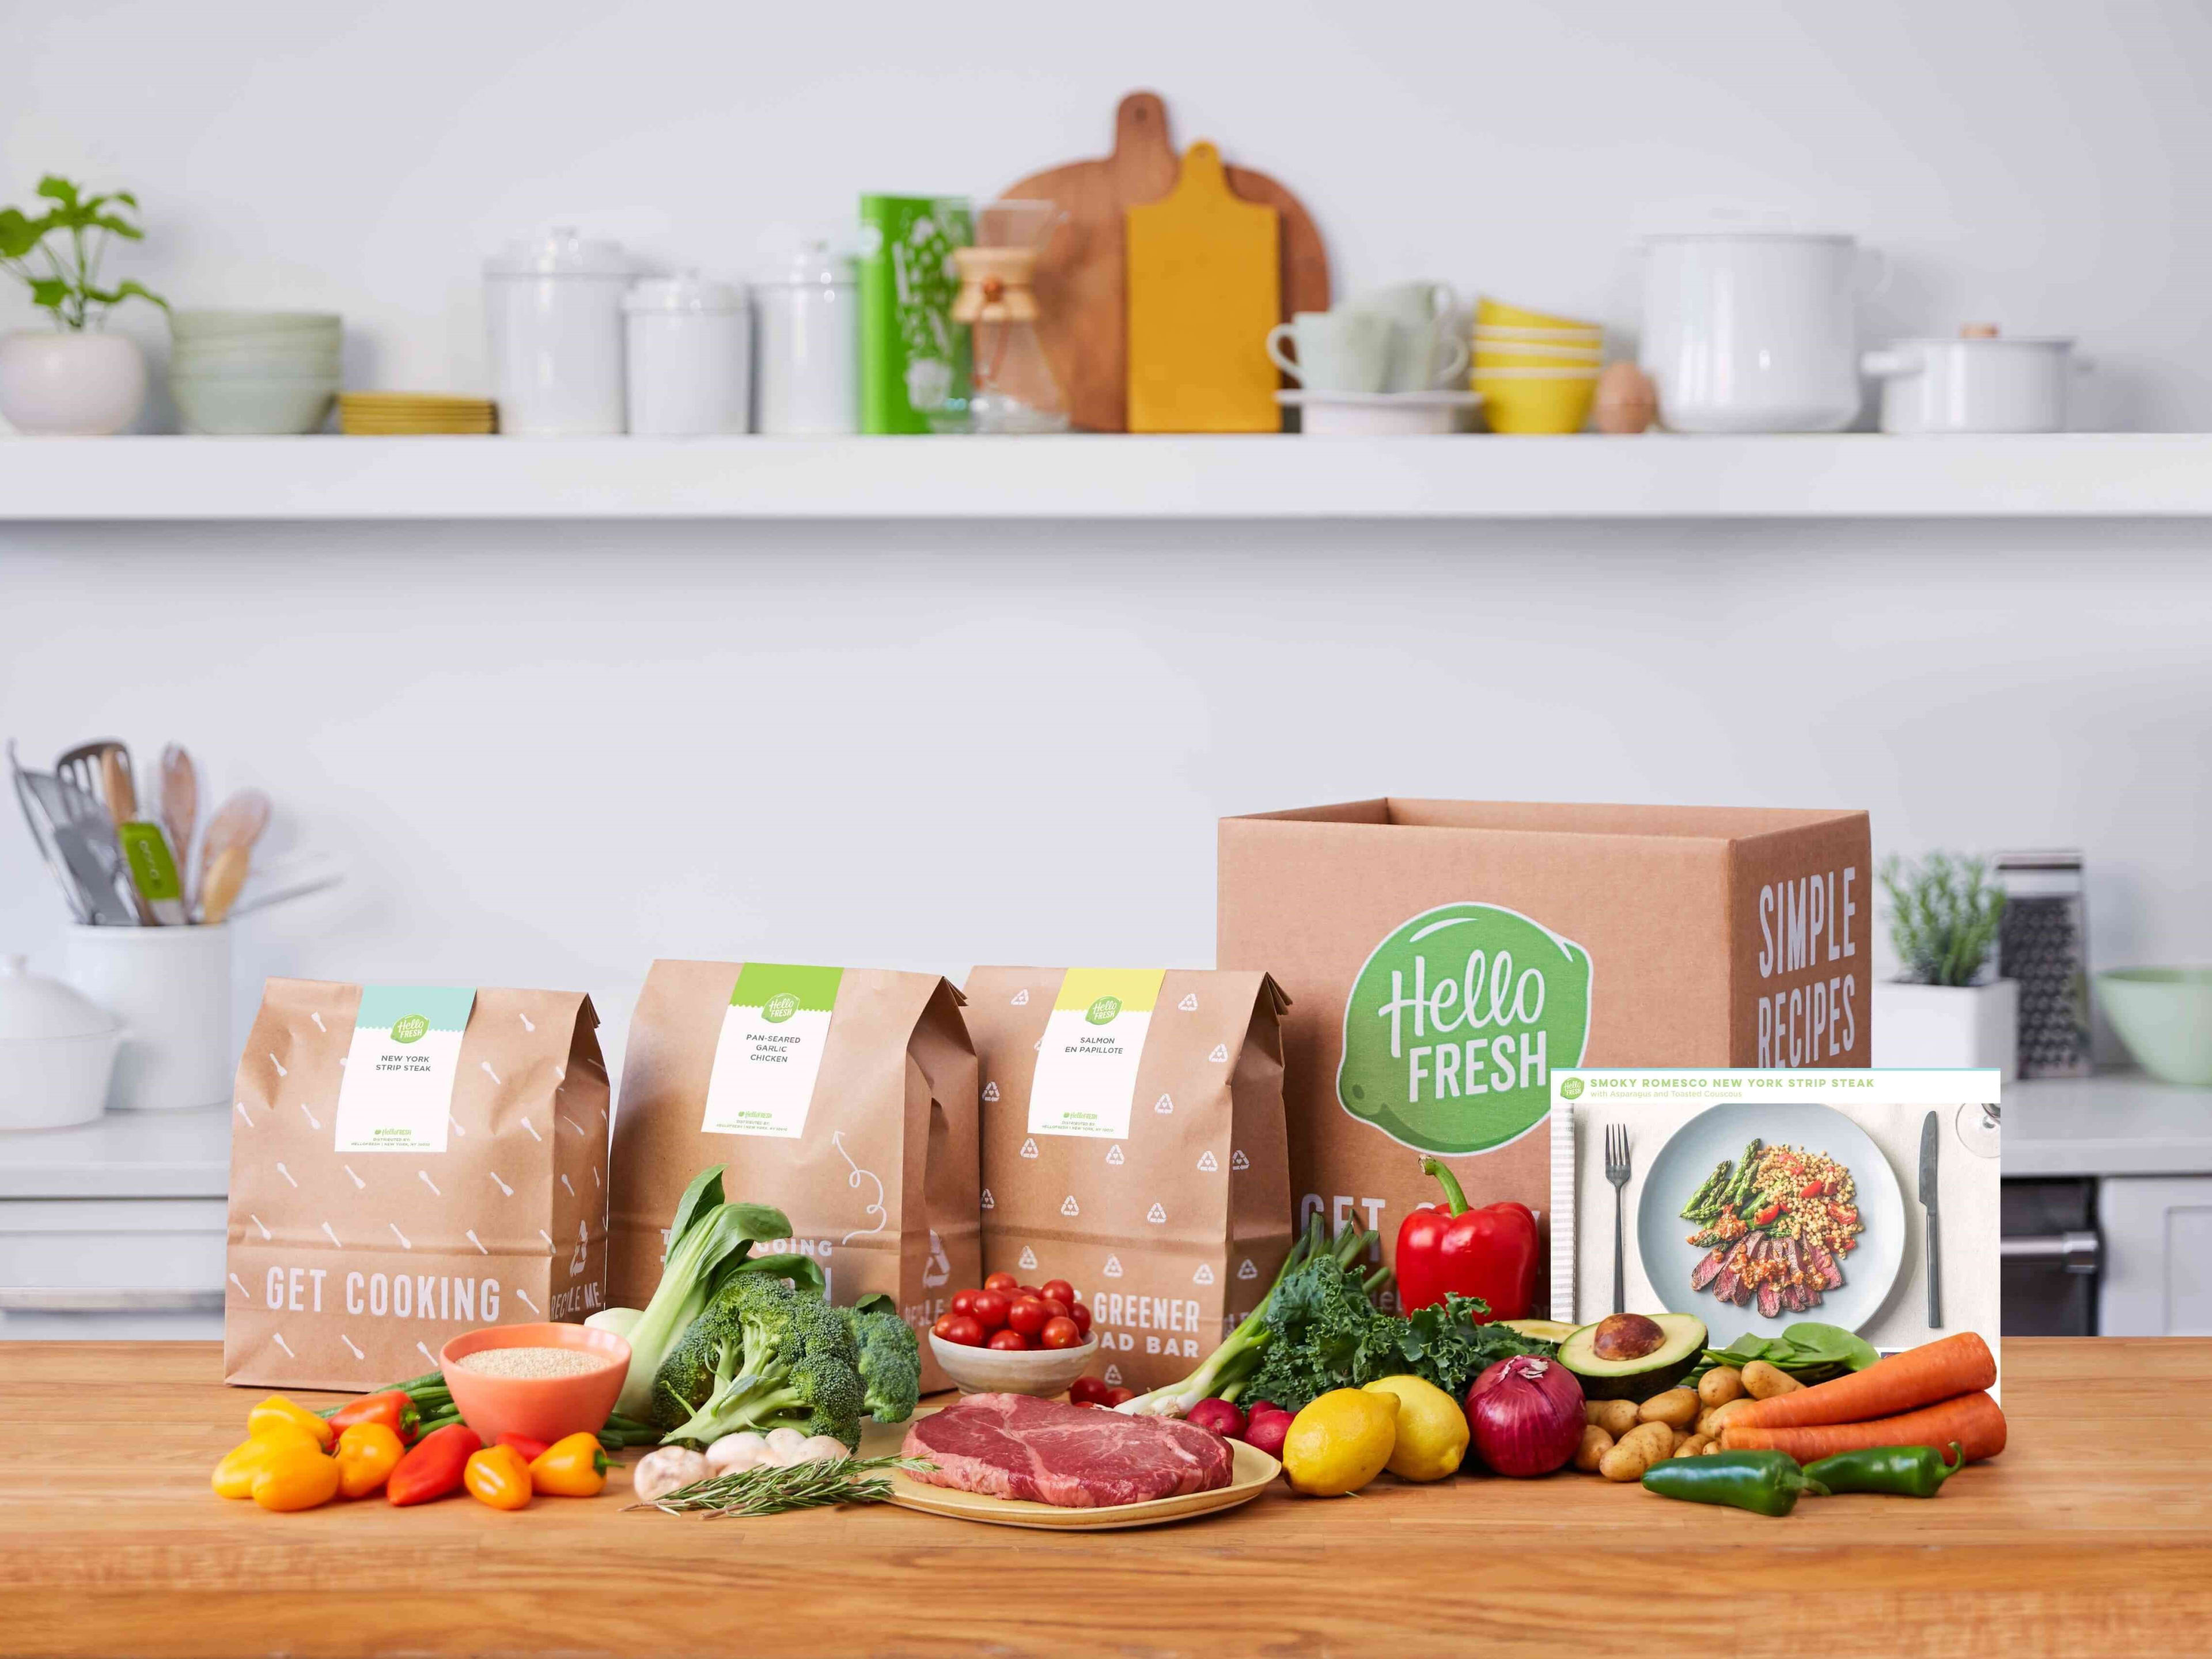 Low calorie meal kits from HelloFresh